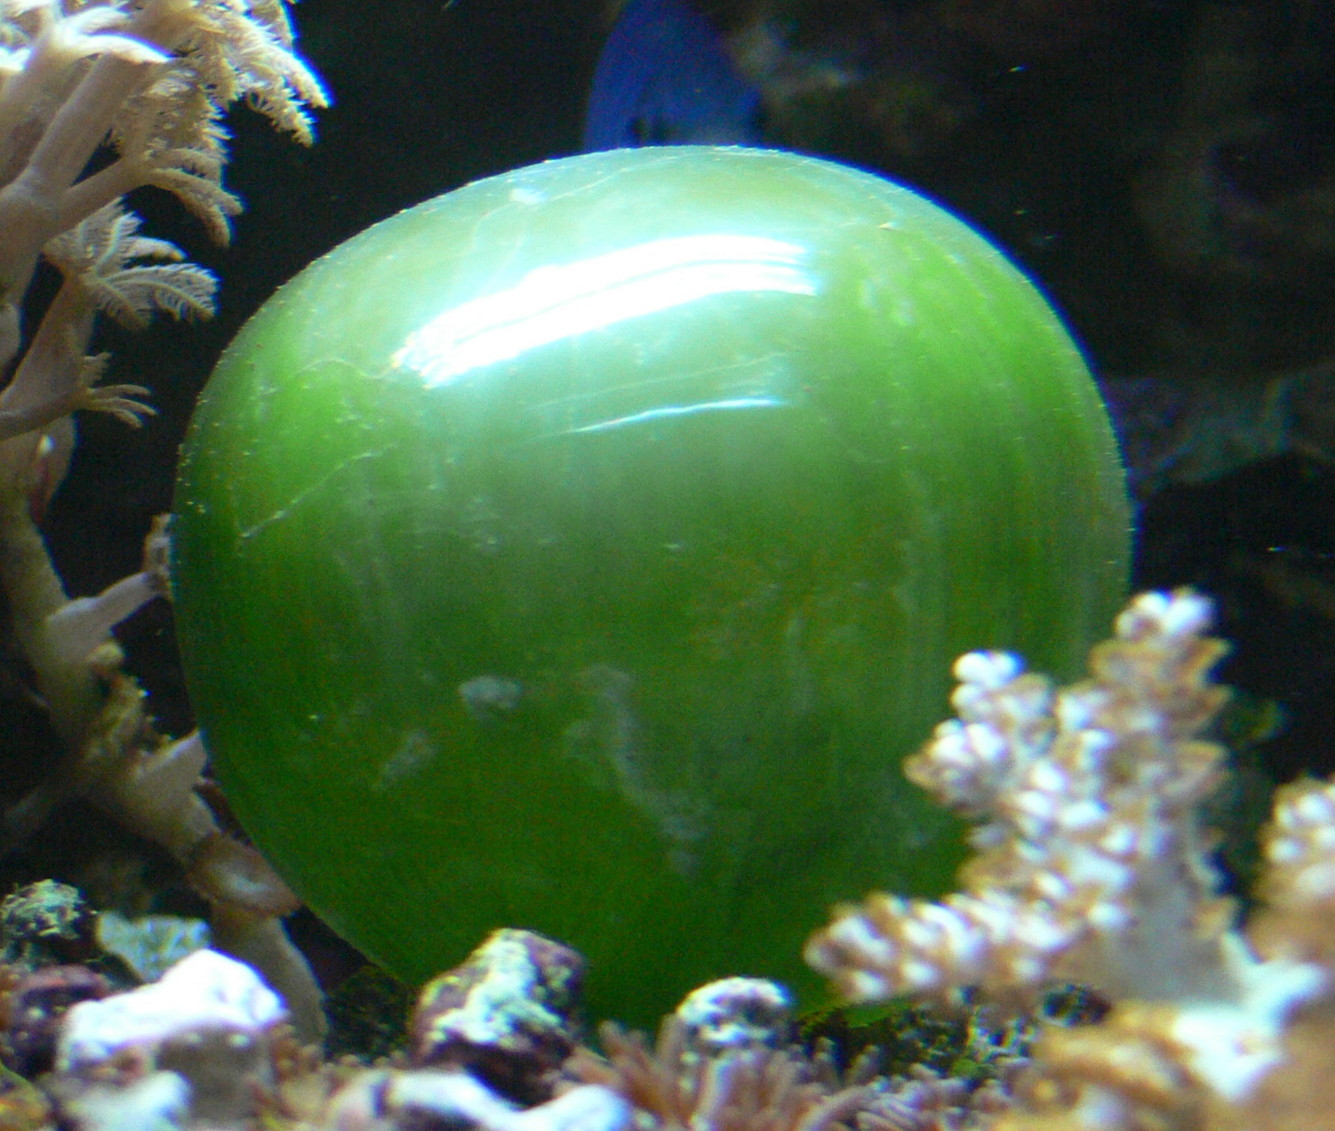 large green orb that looks a lot like a grape but is actually a single-celled alga; some other sea plants are visible in the foreground, background is dark